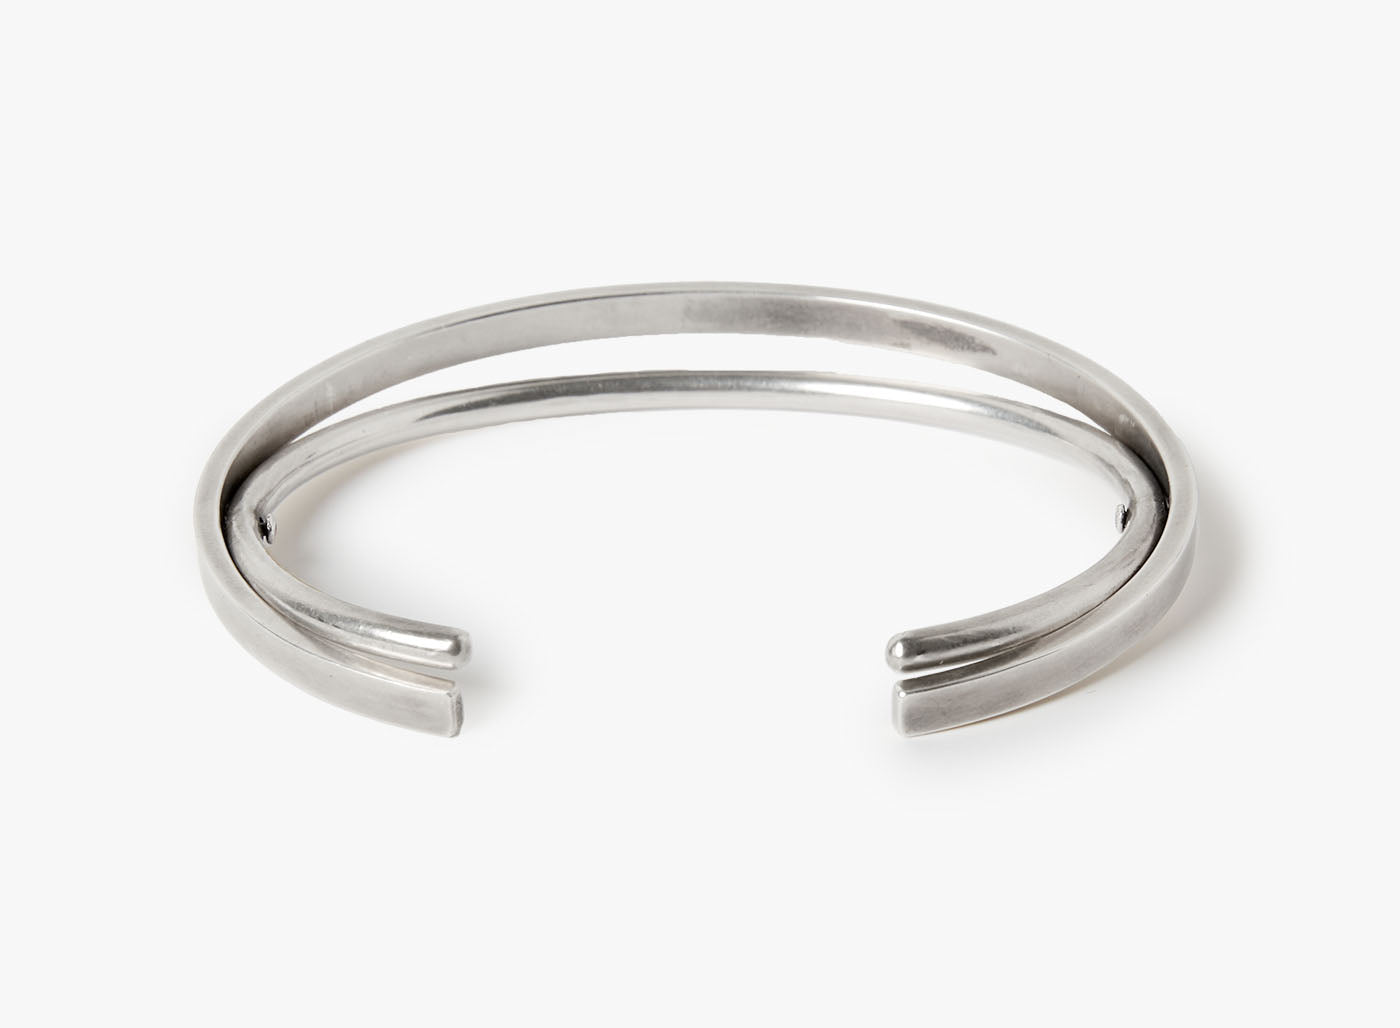 HINGED CUFF BRACELET 385: this dual pivoting cuff features two 8 gauge round wire cuffs that rotate on top of one another